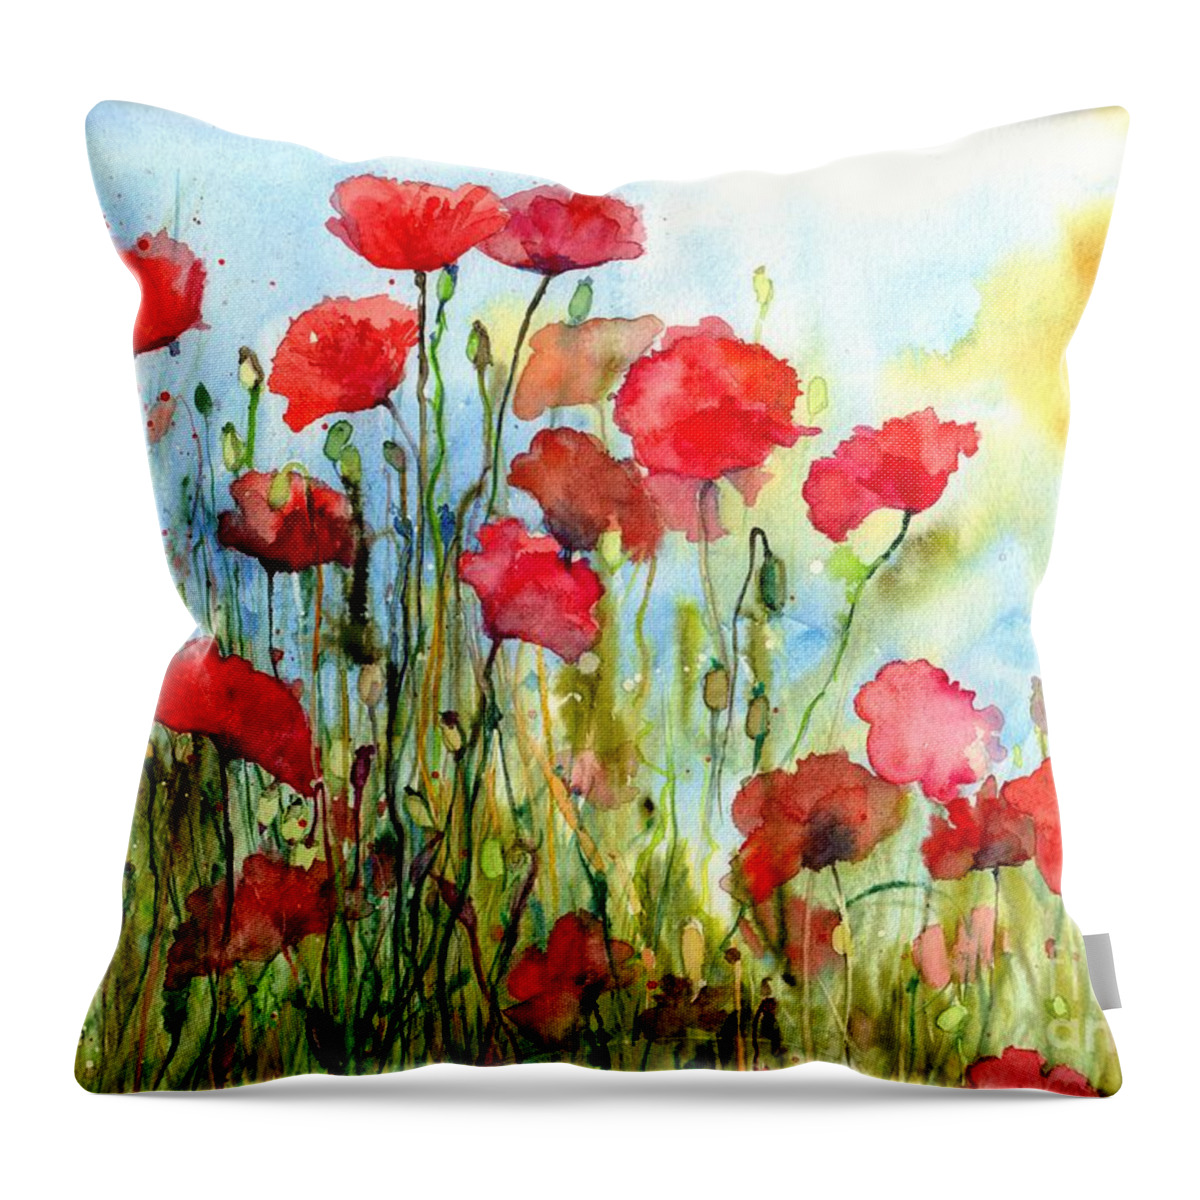 Poppy Throw Pillow featuring the painting Poppy Field by Suzann Sines